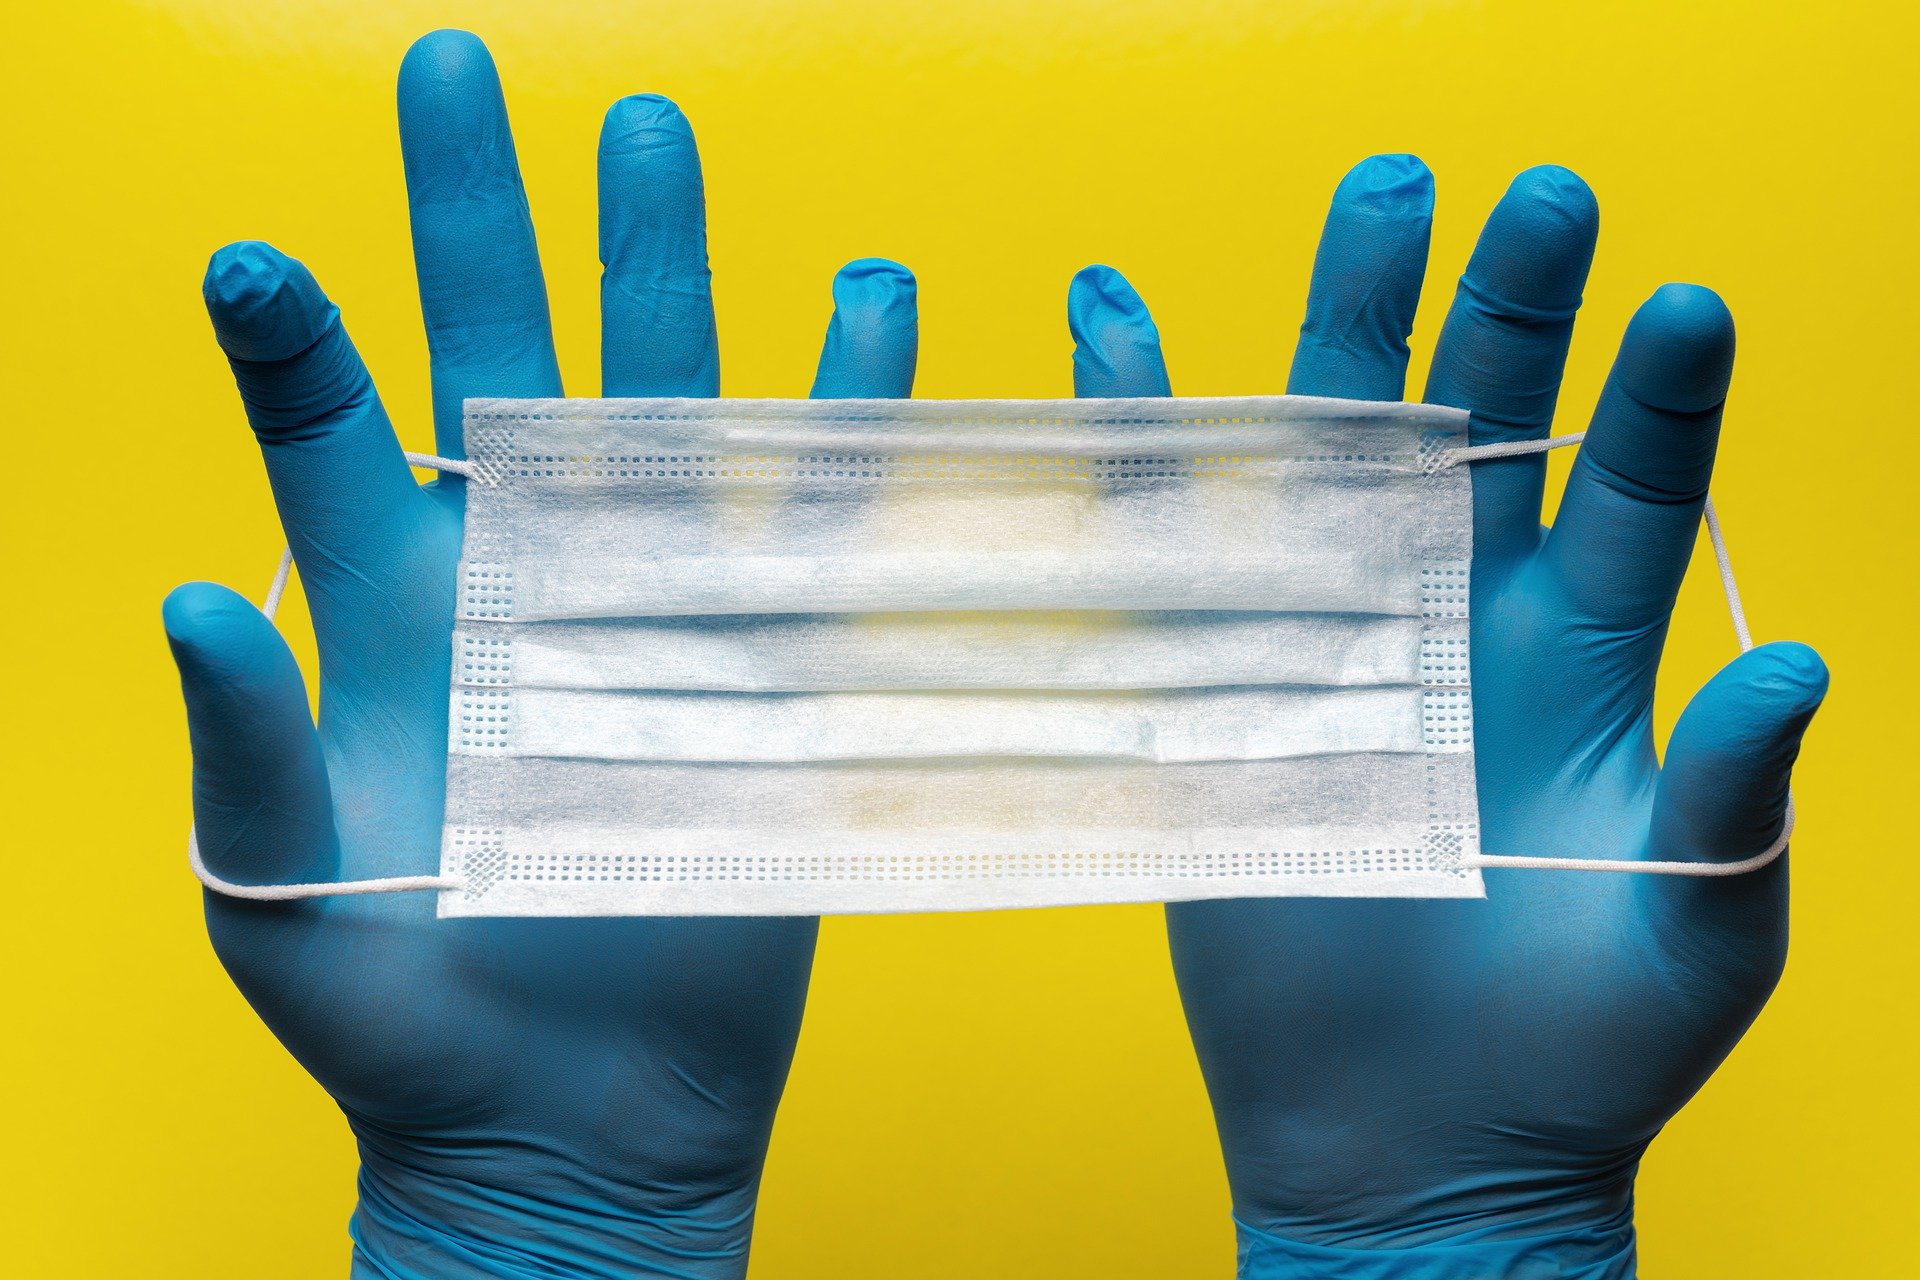 Closeup of a hands wearing bright blue medical gloves, stretching out a white surgical mask, against a bright yellow background, meant to symbolize the impact of COVID-19 on personal injury cases.